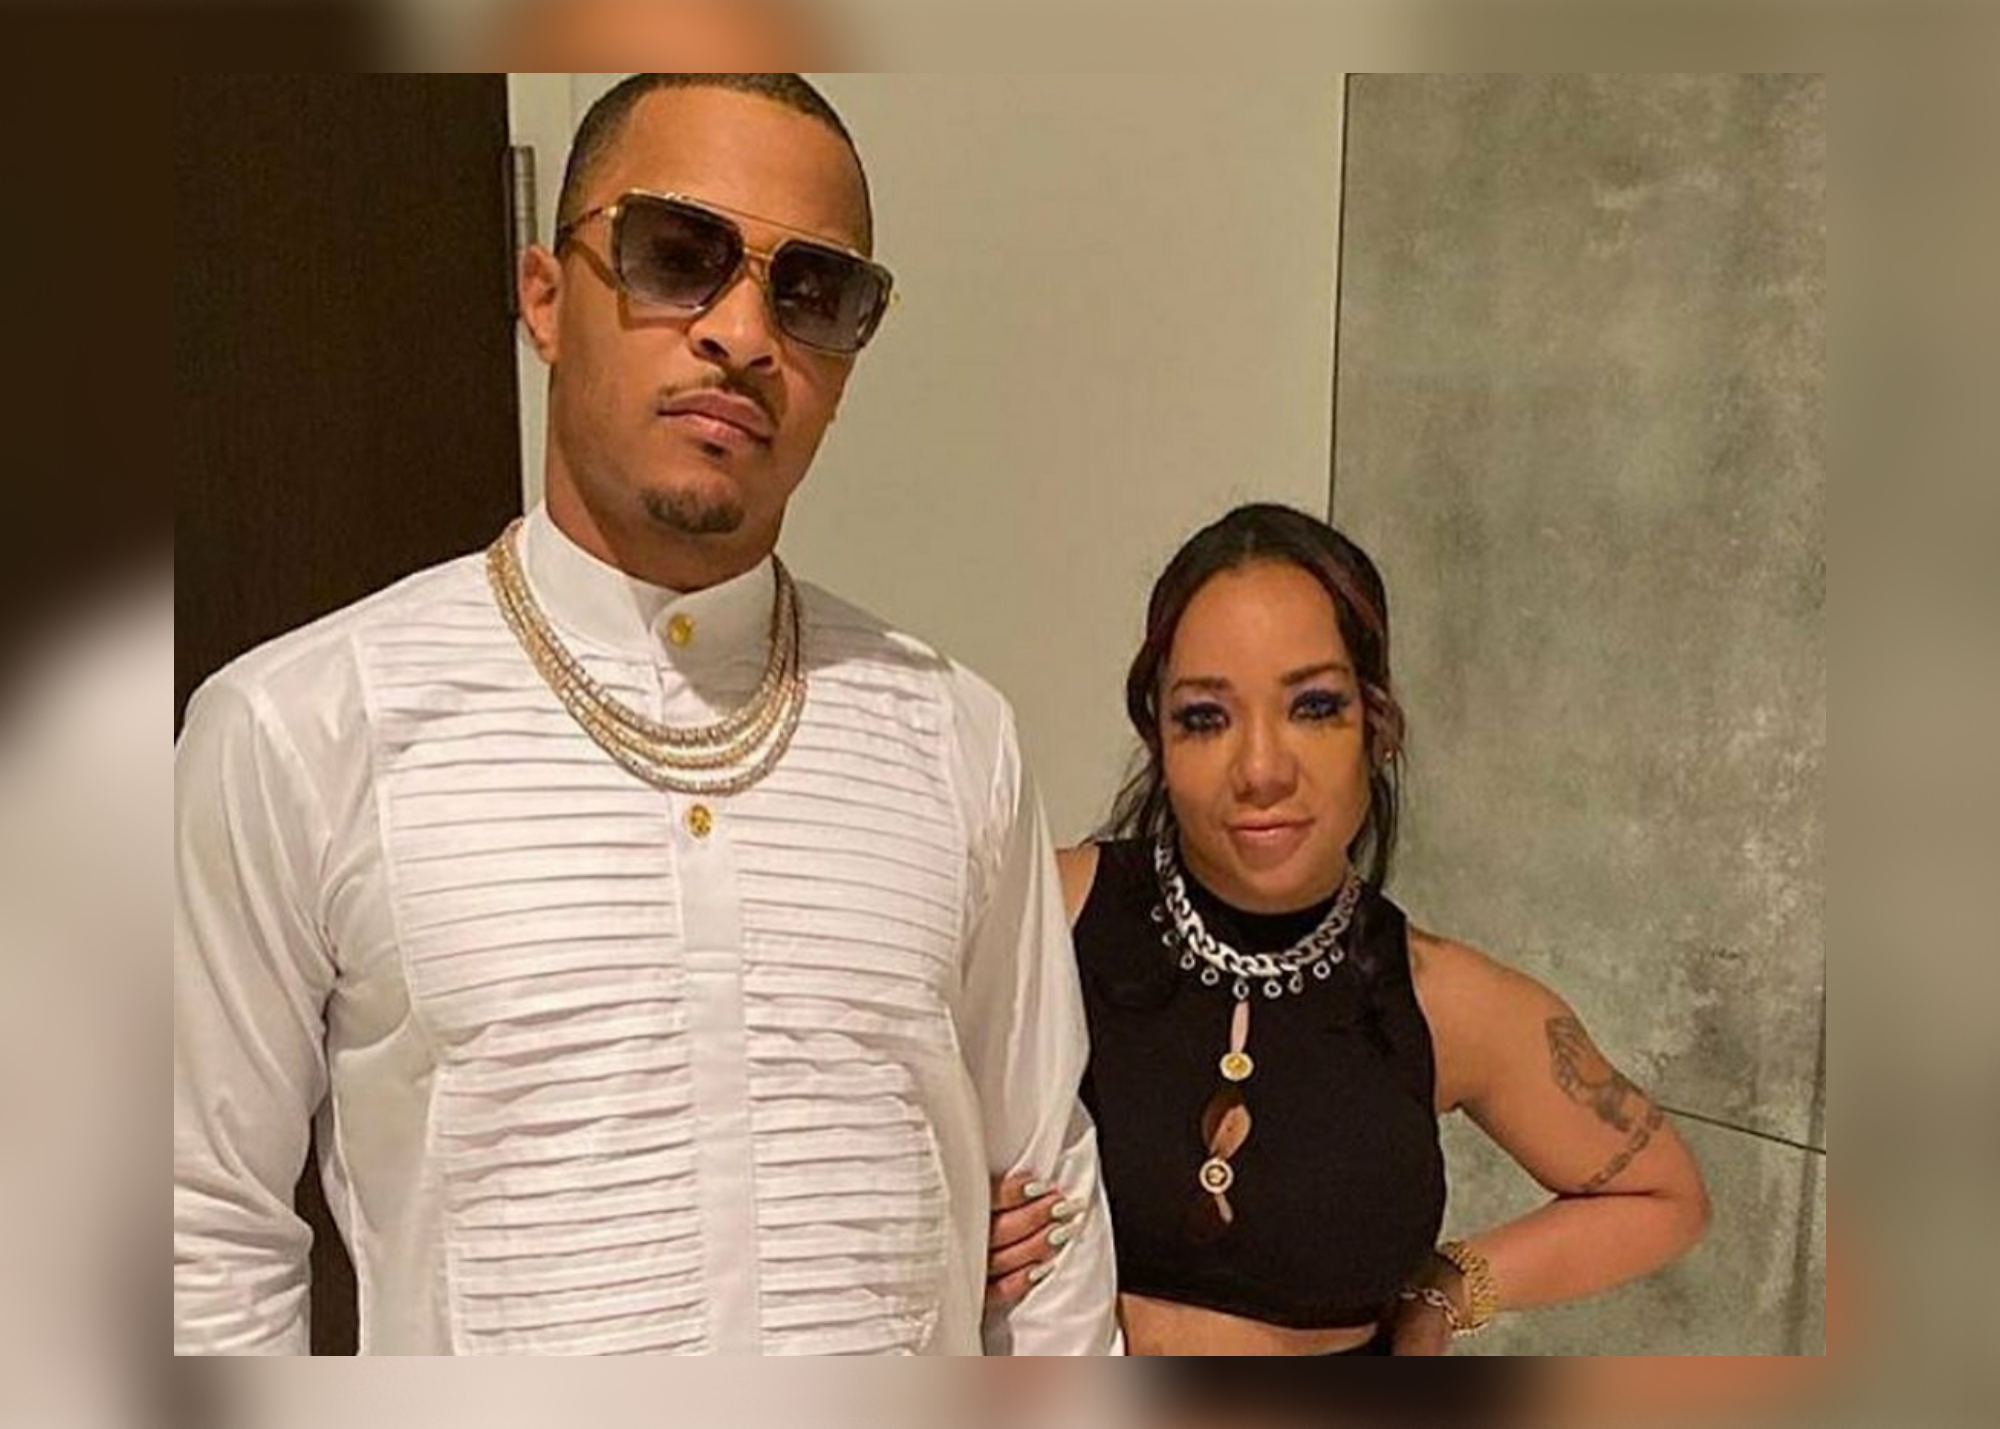 T.I. And Tiny’s Reality Show Suspended Amid Sexual Abuse Allegations